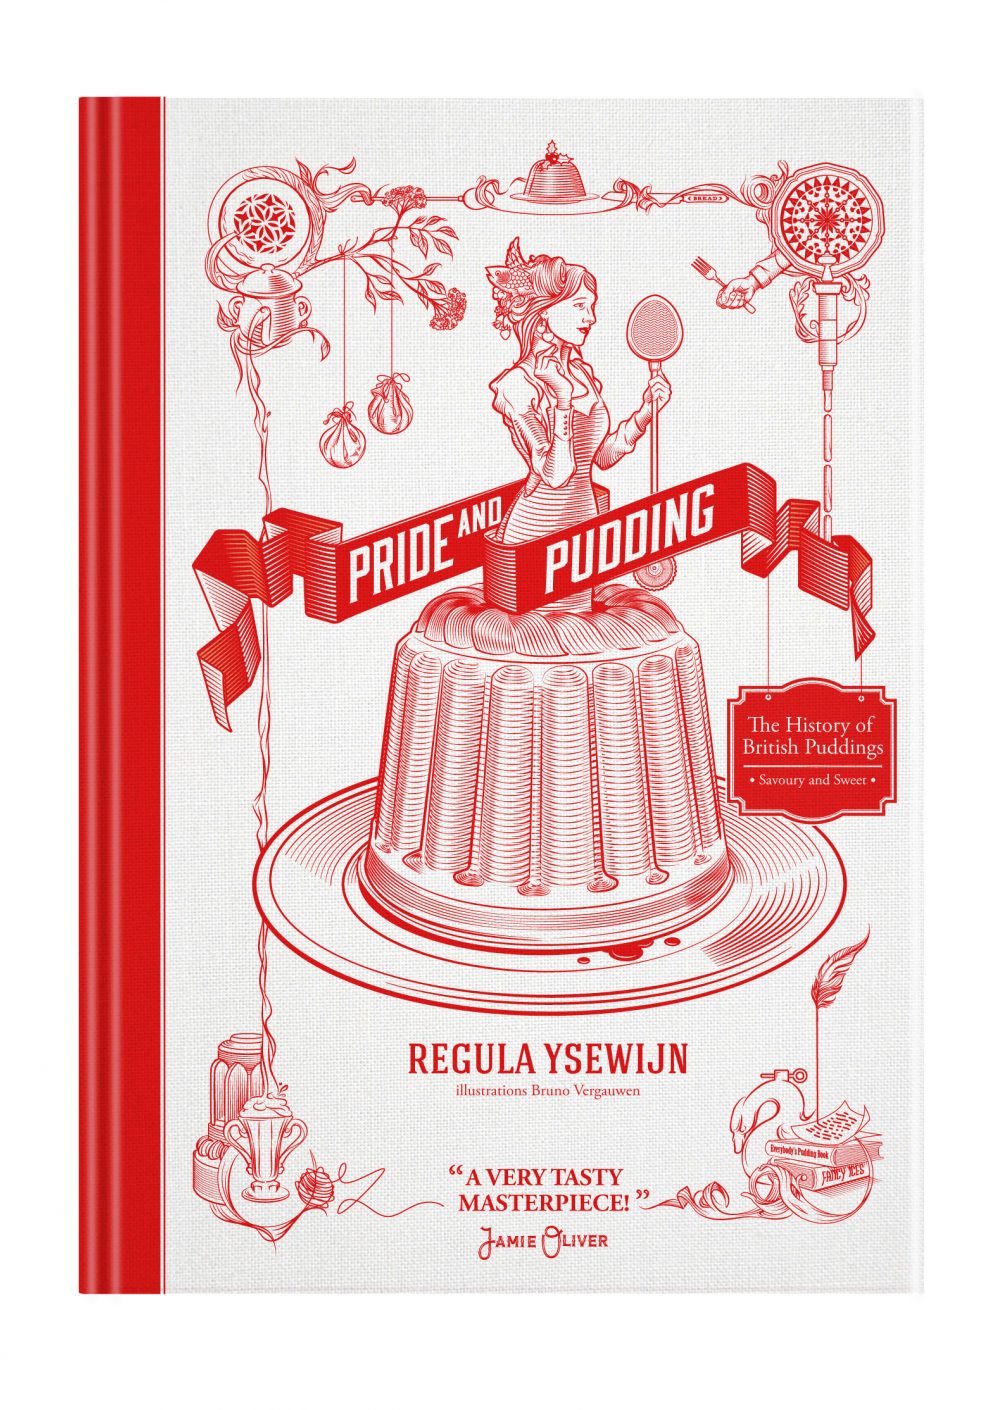 Pride & Pudding:  The History of British Puddings, Savoury and Sweet